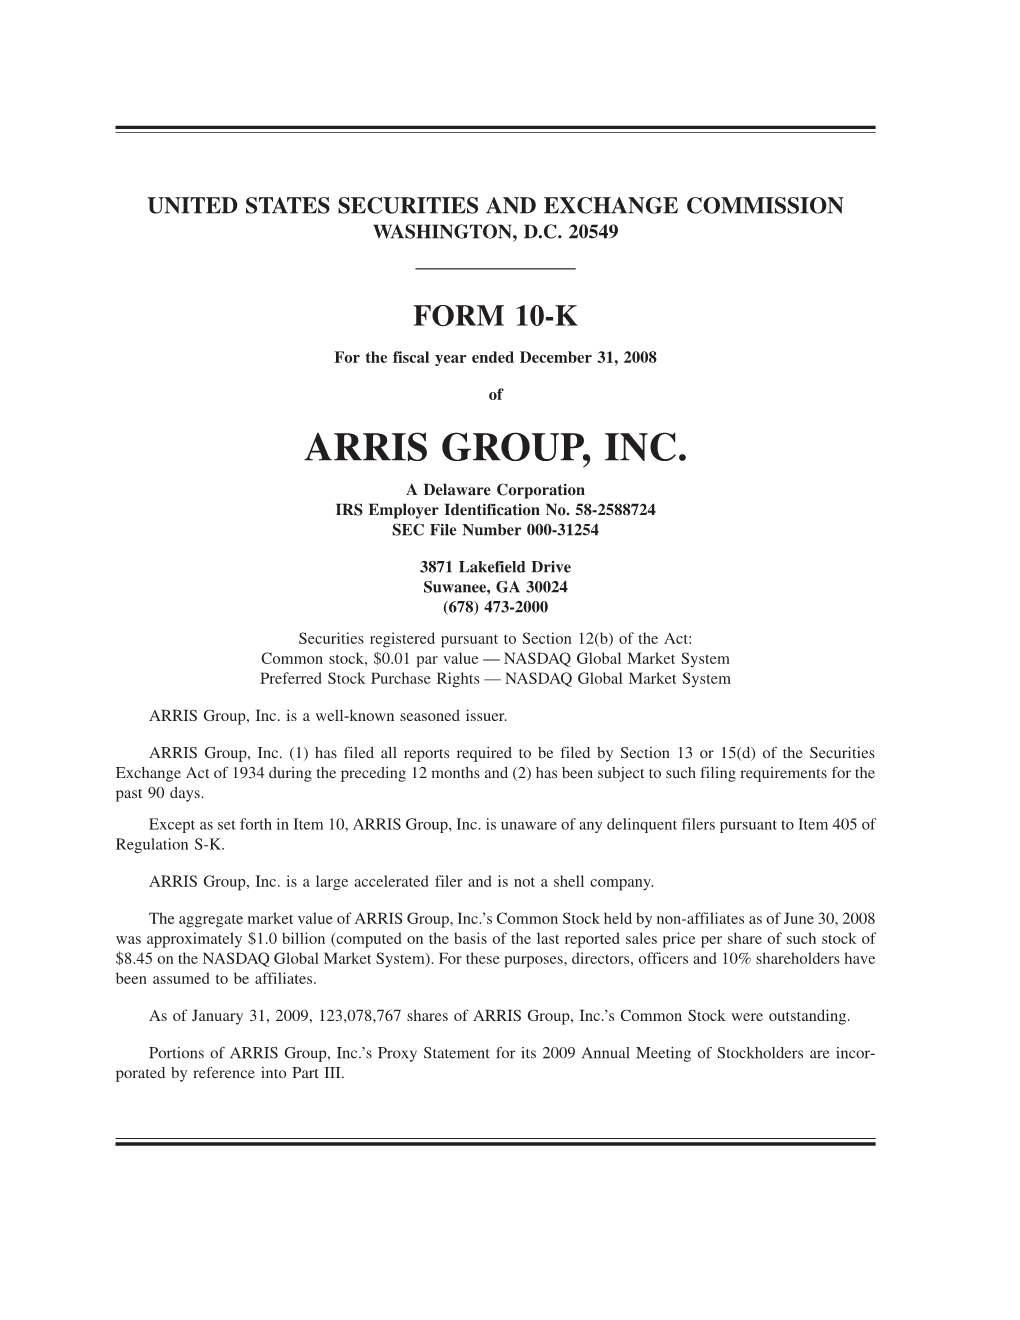 ARRIS GROUP, INC. a Delaware Corporation IRS Employer Identification No